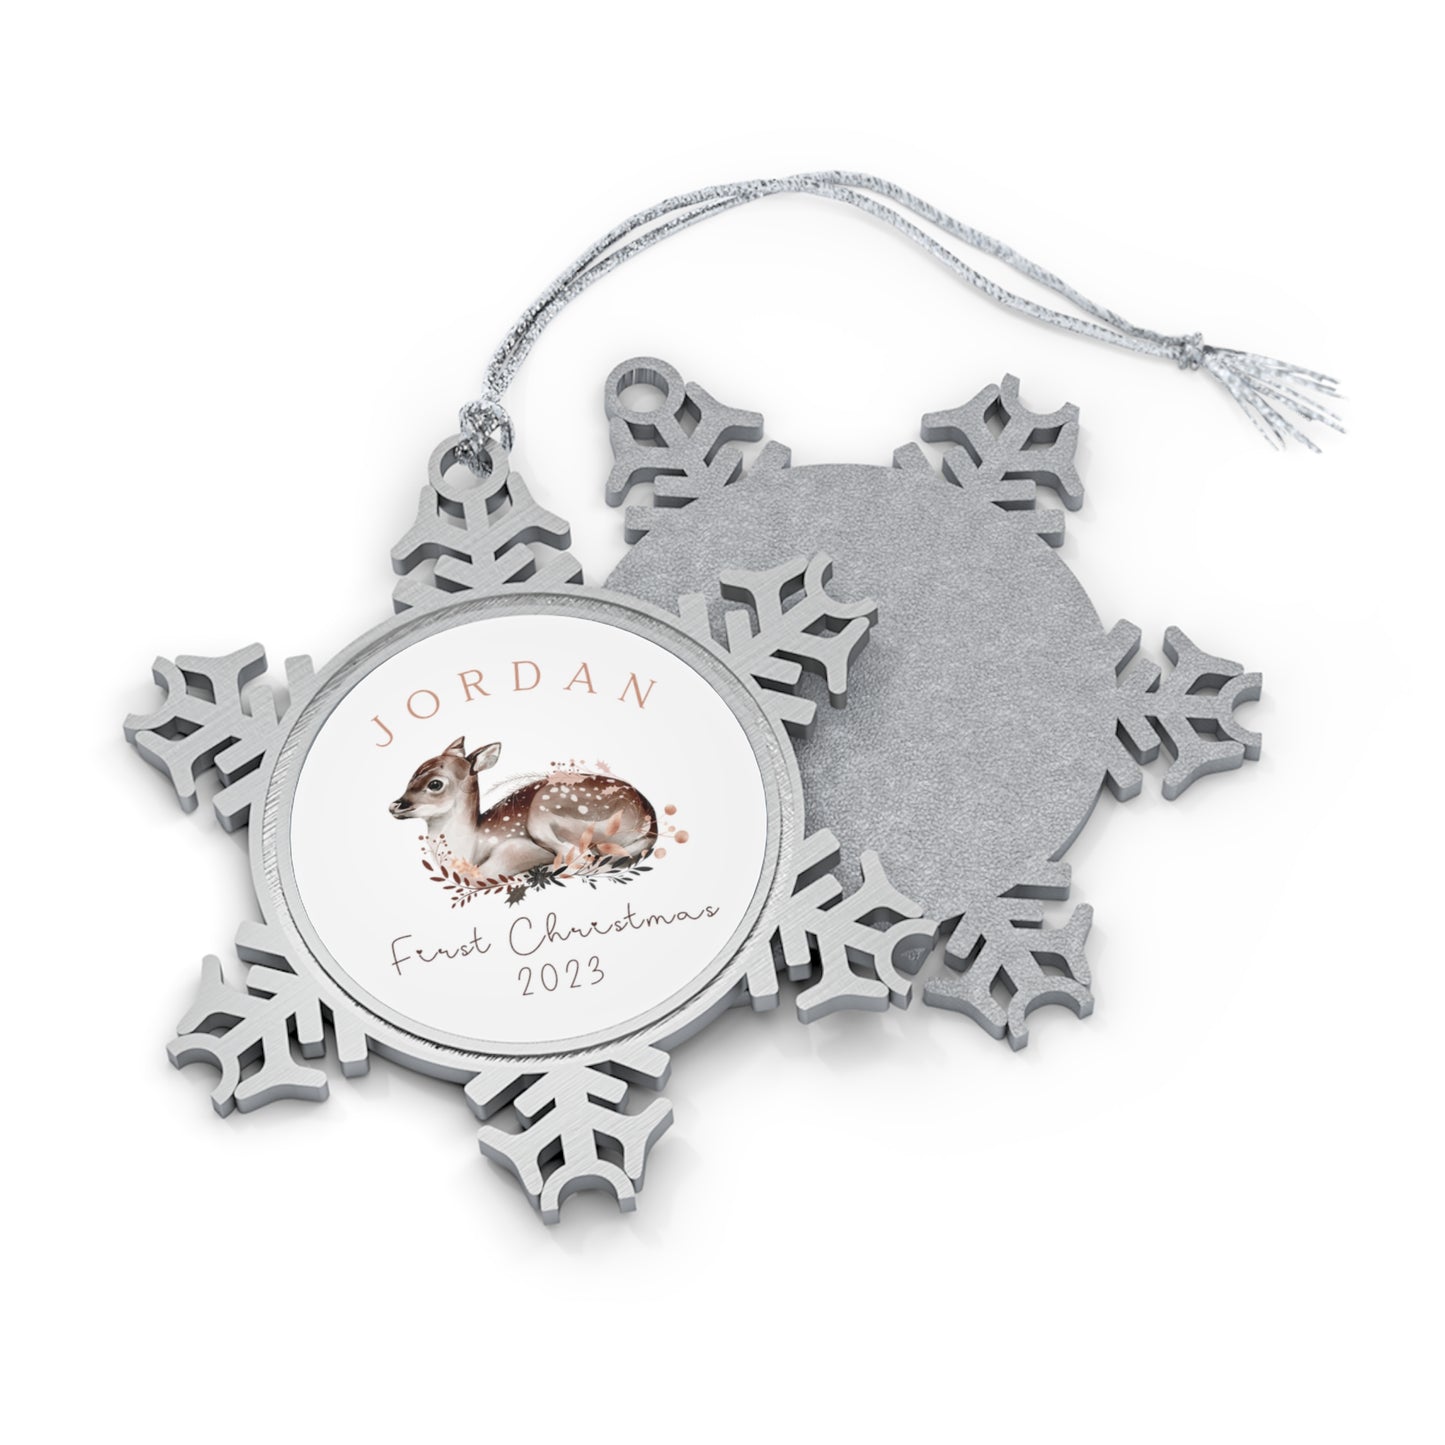 Personalized Pewter Snowflake Ornament | Woodland Deer